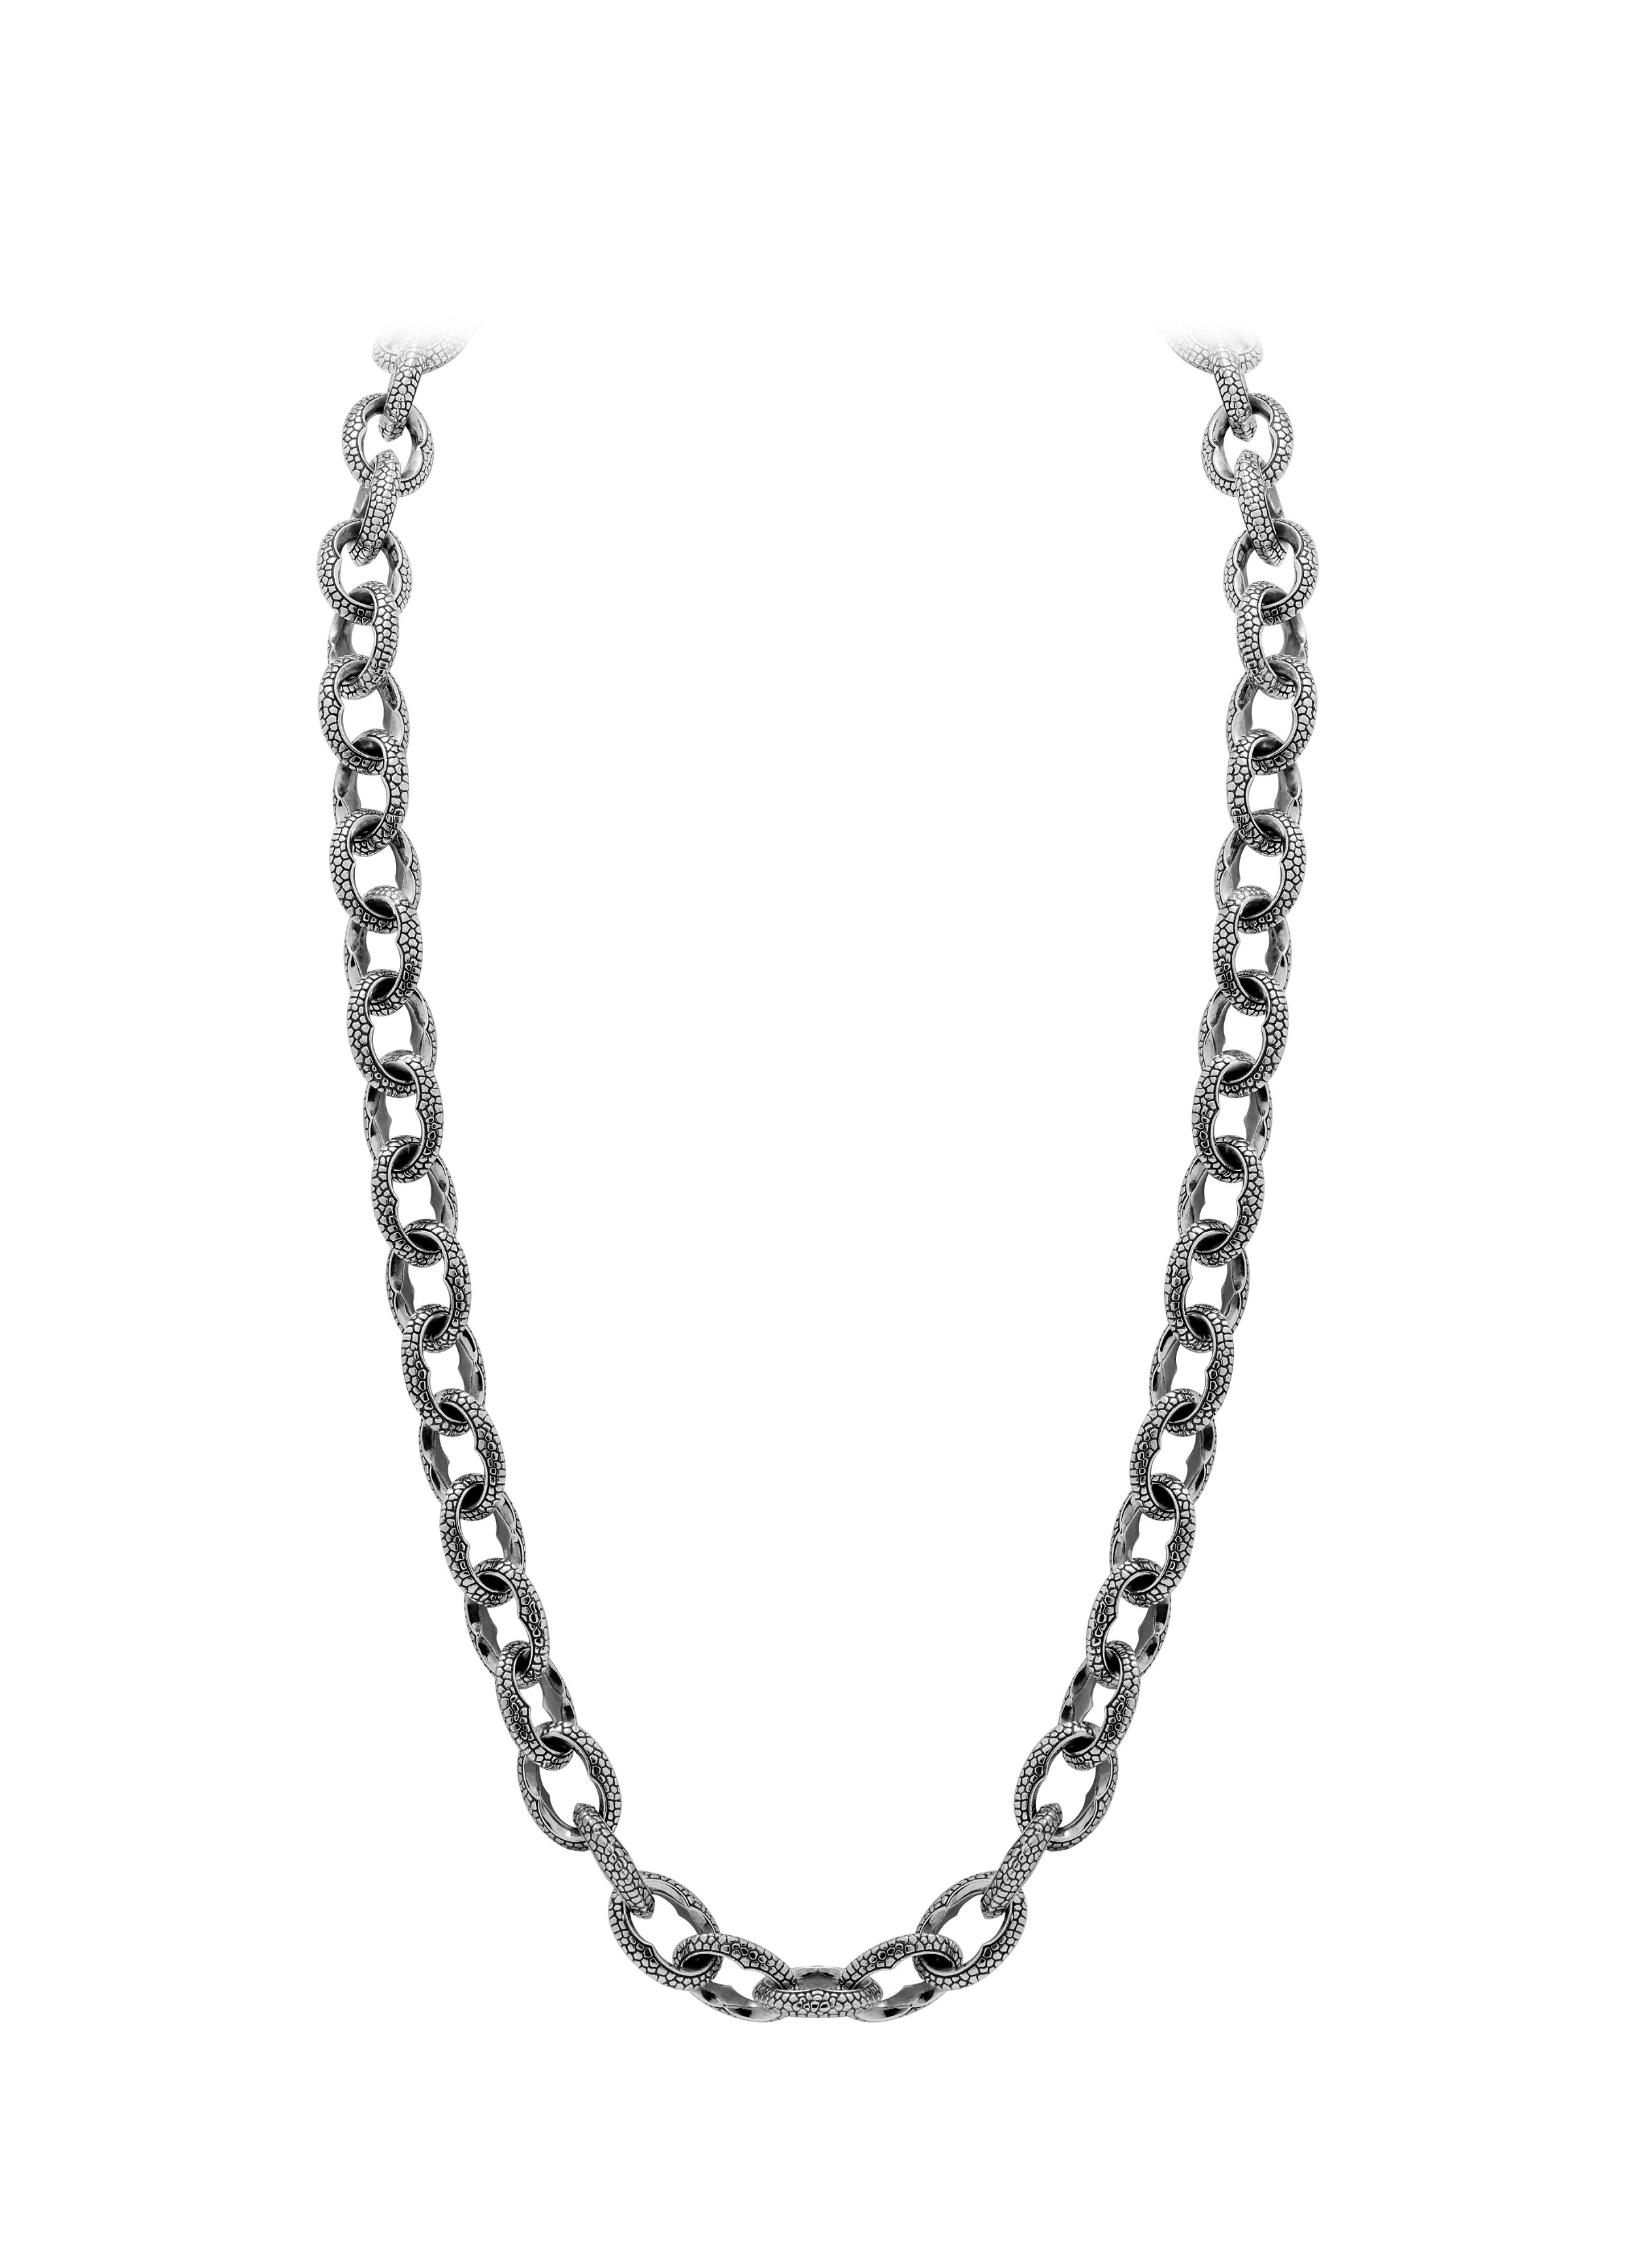 Rayman Chain in Oxidized Sterling Silver - 24"